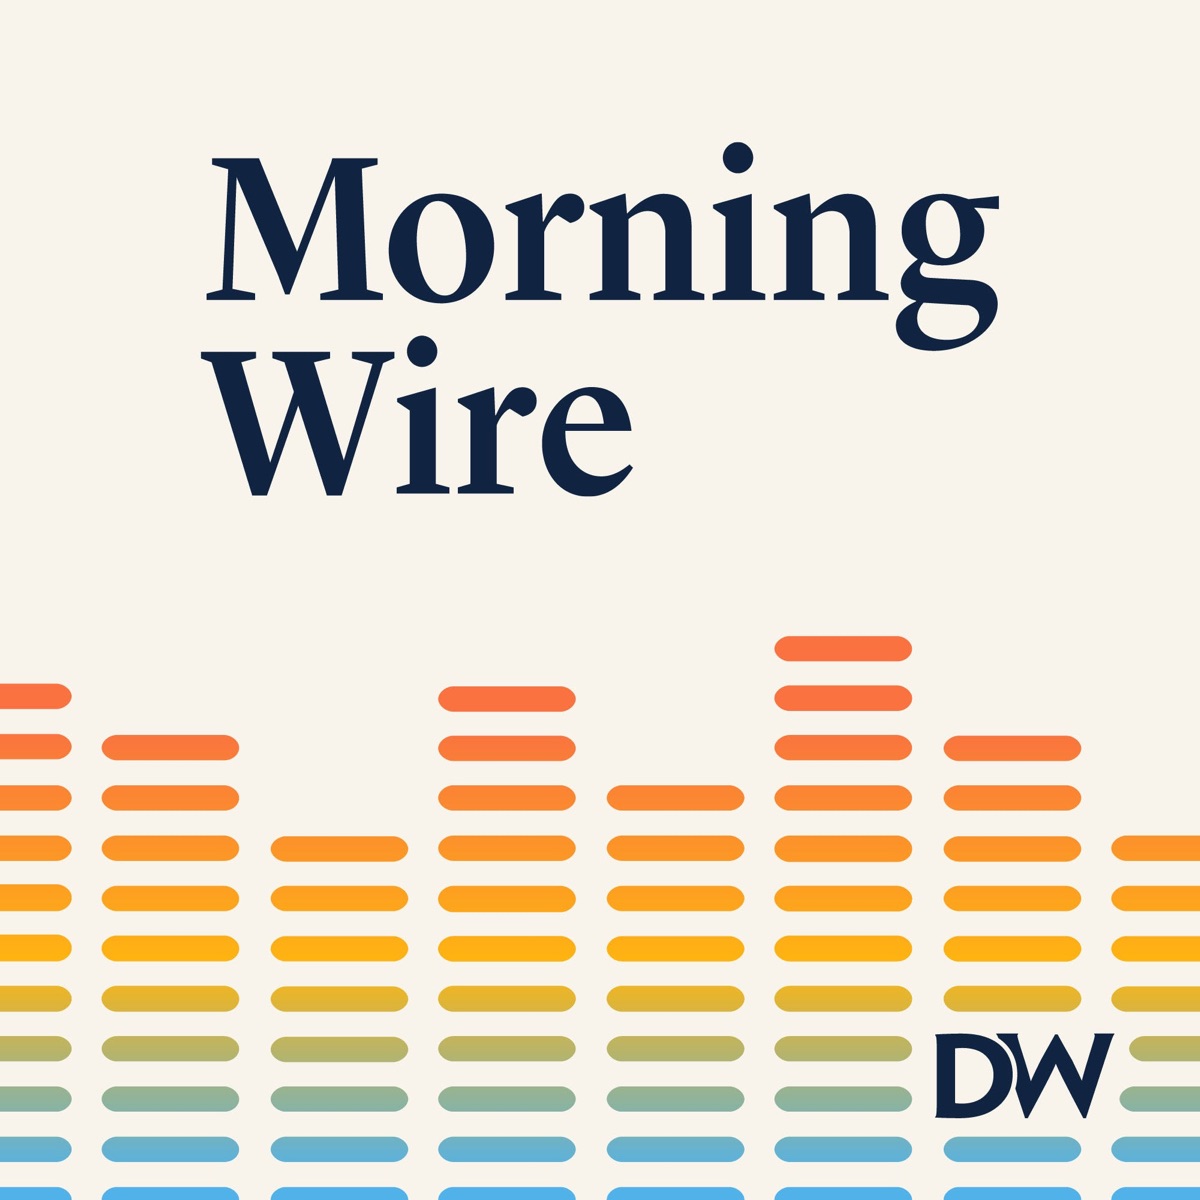 Morning Wire